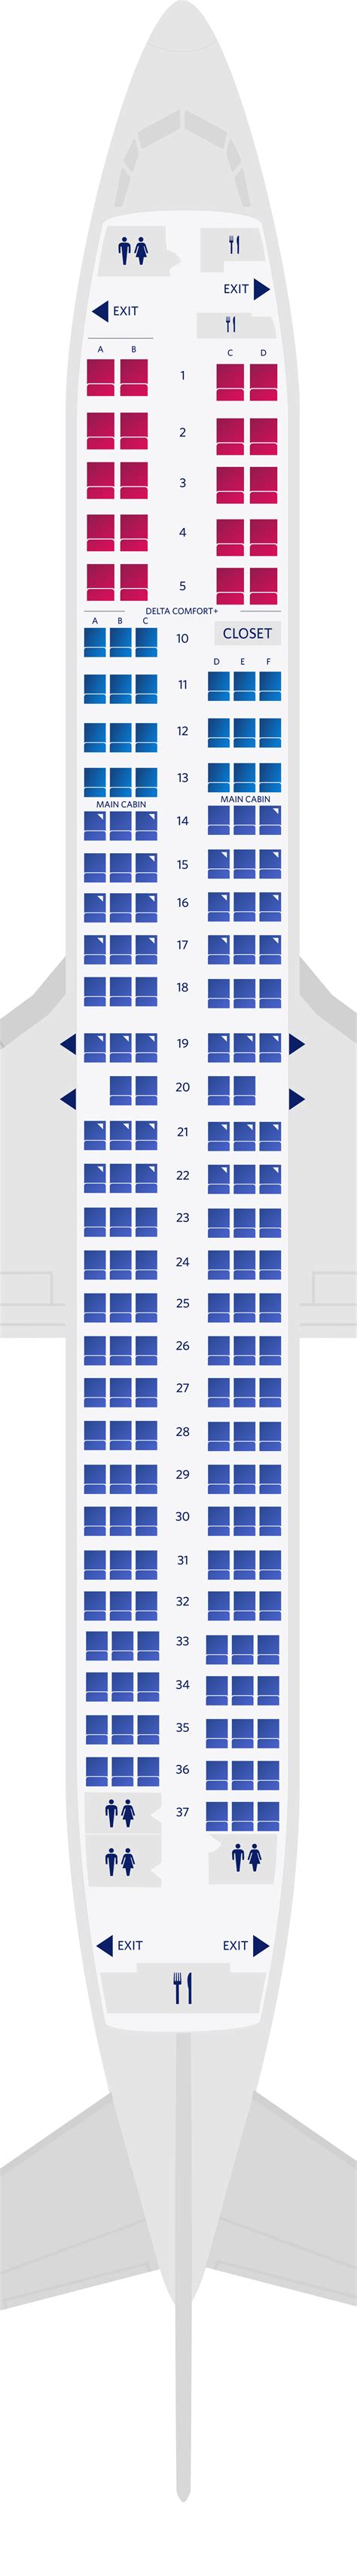 Boeing 737 Seating Chart